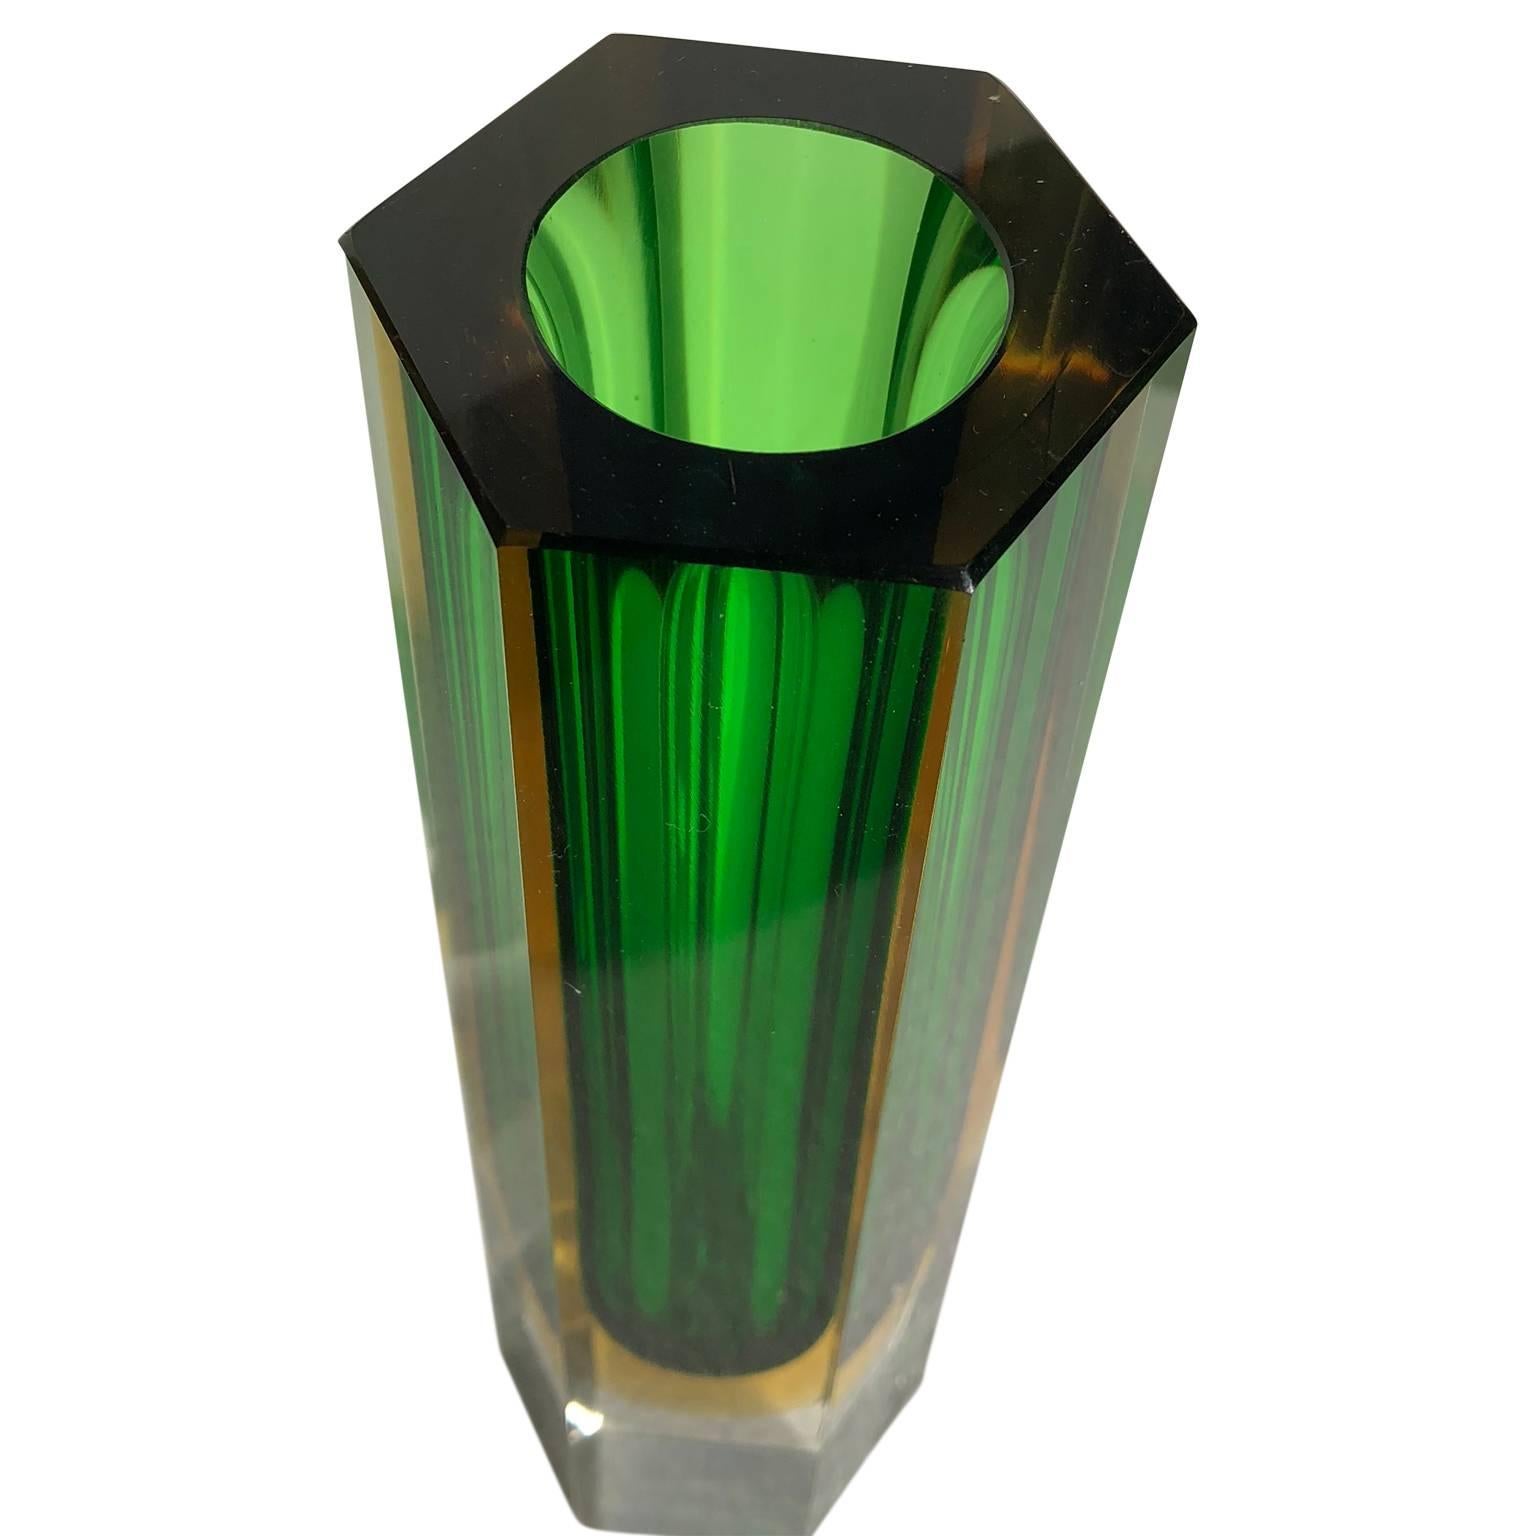 Italian glass vase by Murano Sommerso with six faceted sides and merged green and yellow colors.